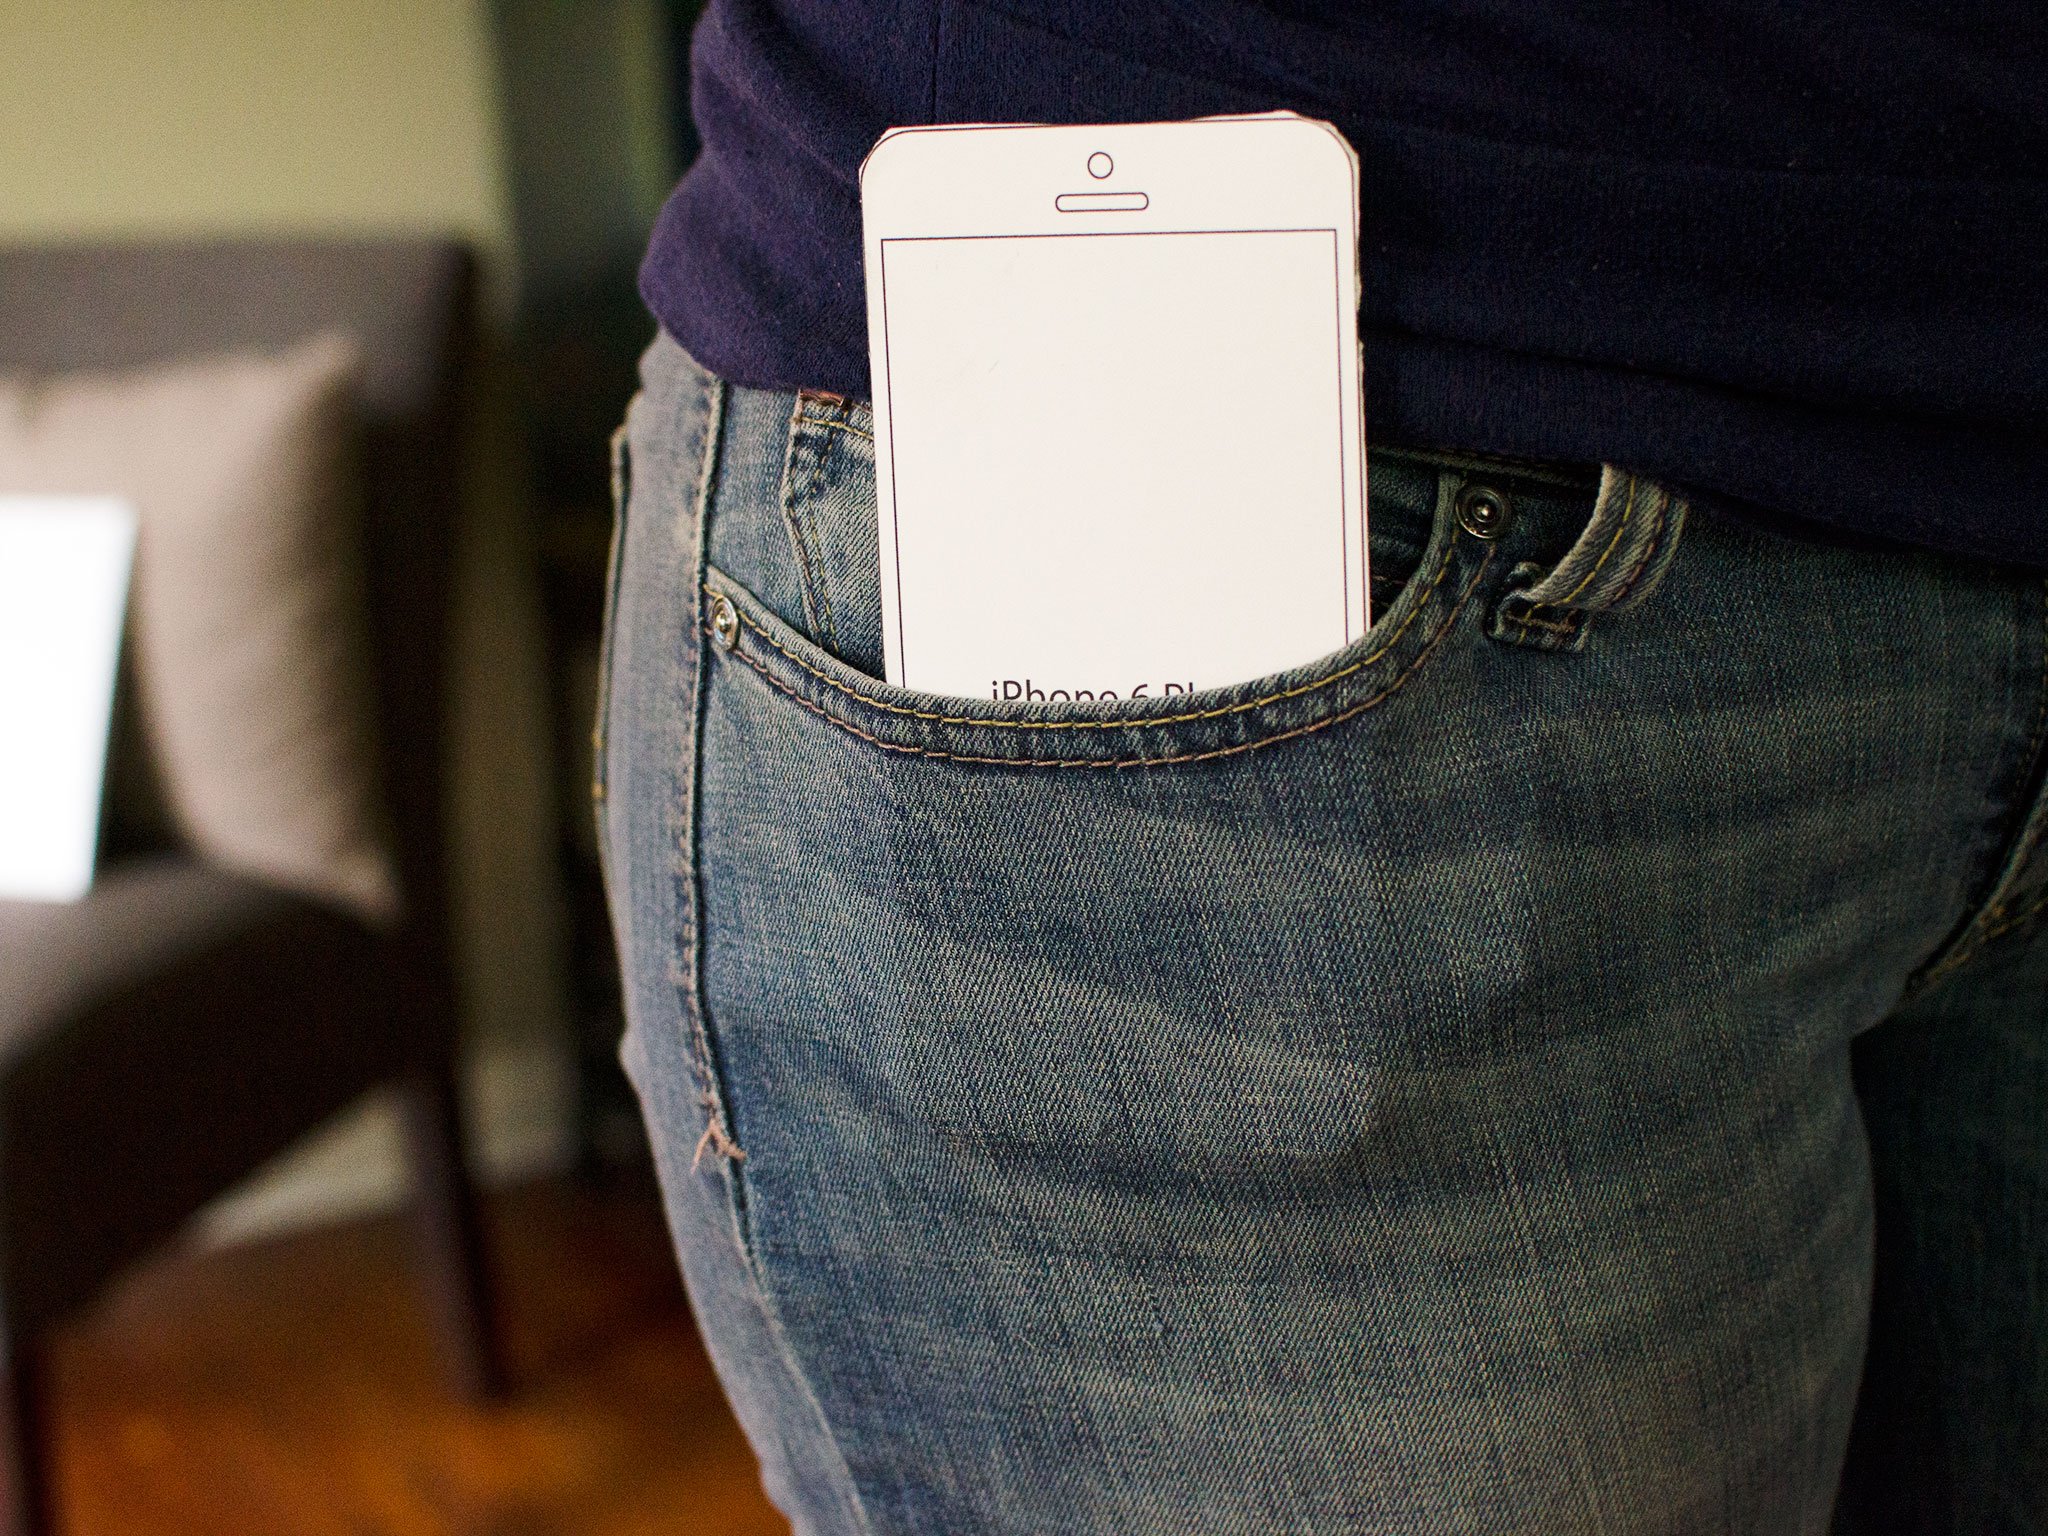 iPhone 6 Plus front pocket view